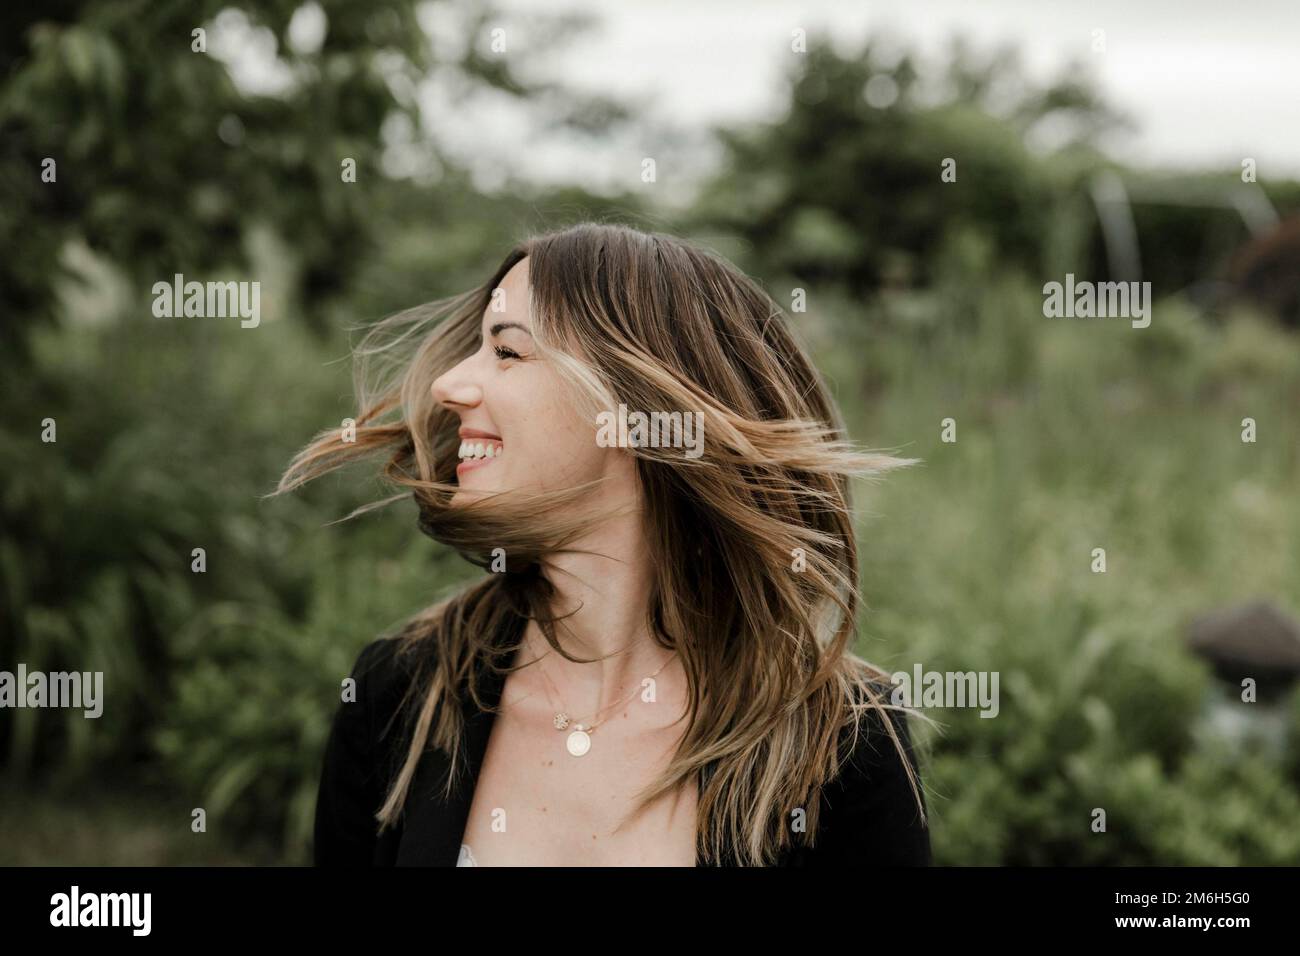 Laughing young woman in portrait, 25, with flying hair Stock Photo